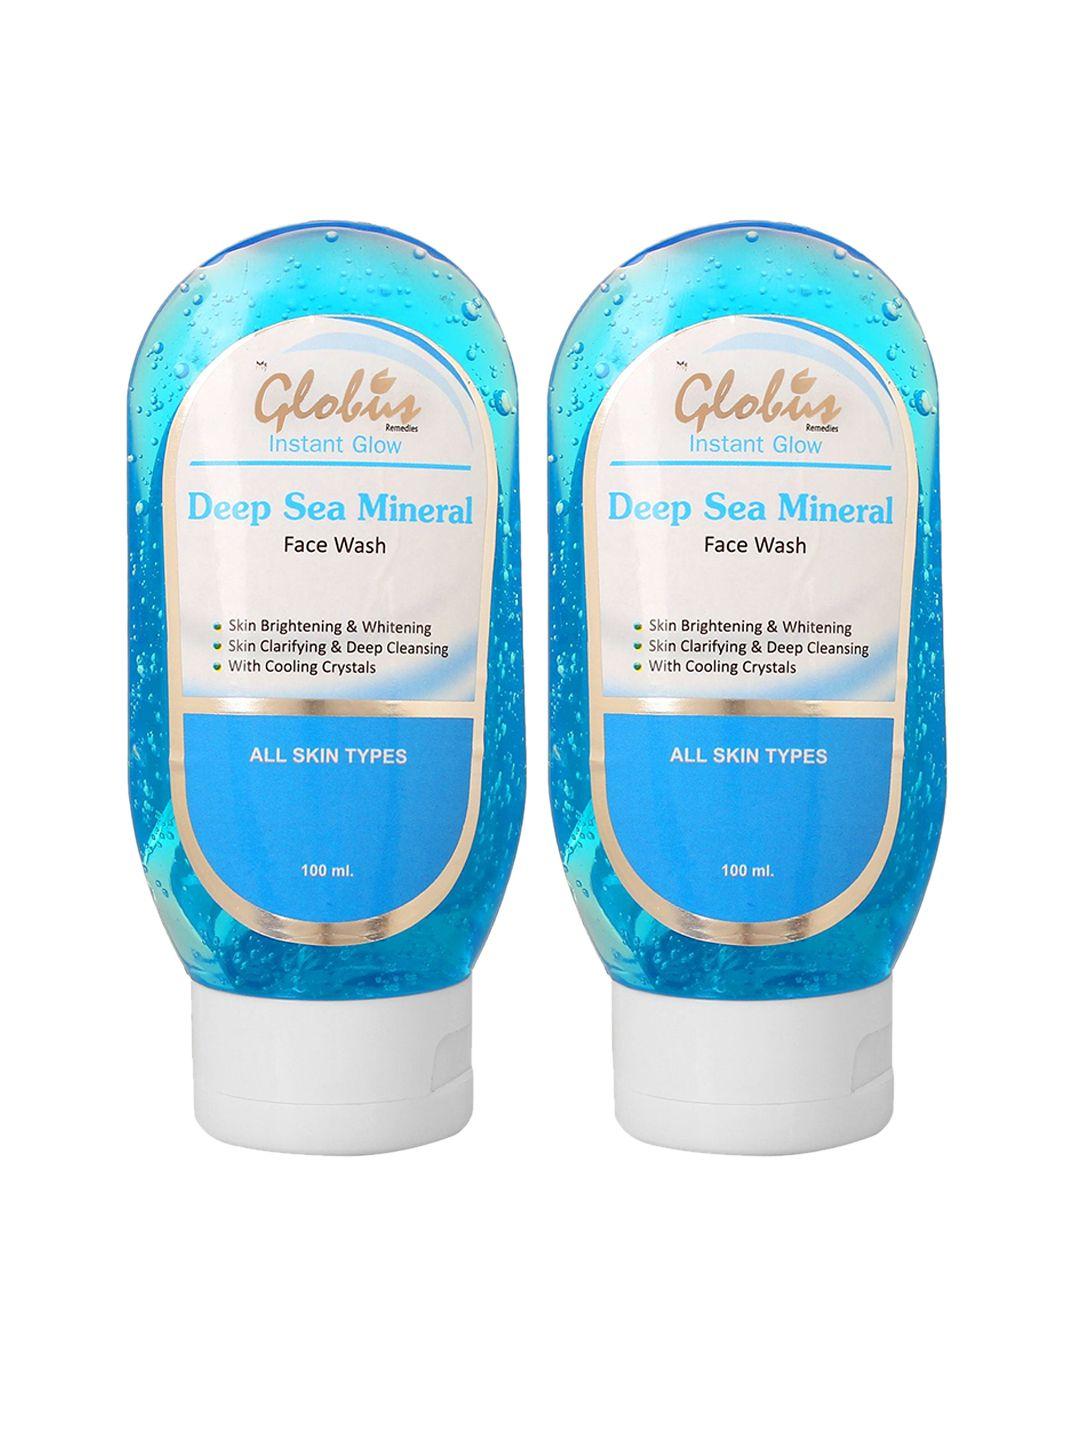 globus remedies set of 2 instant glow deep sea mineral face wash - 100 ml each